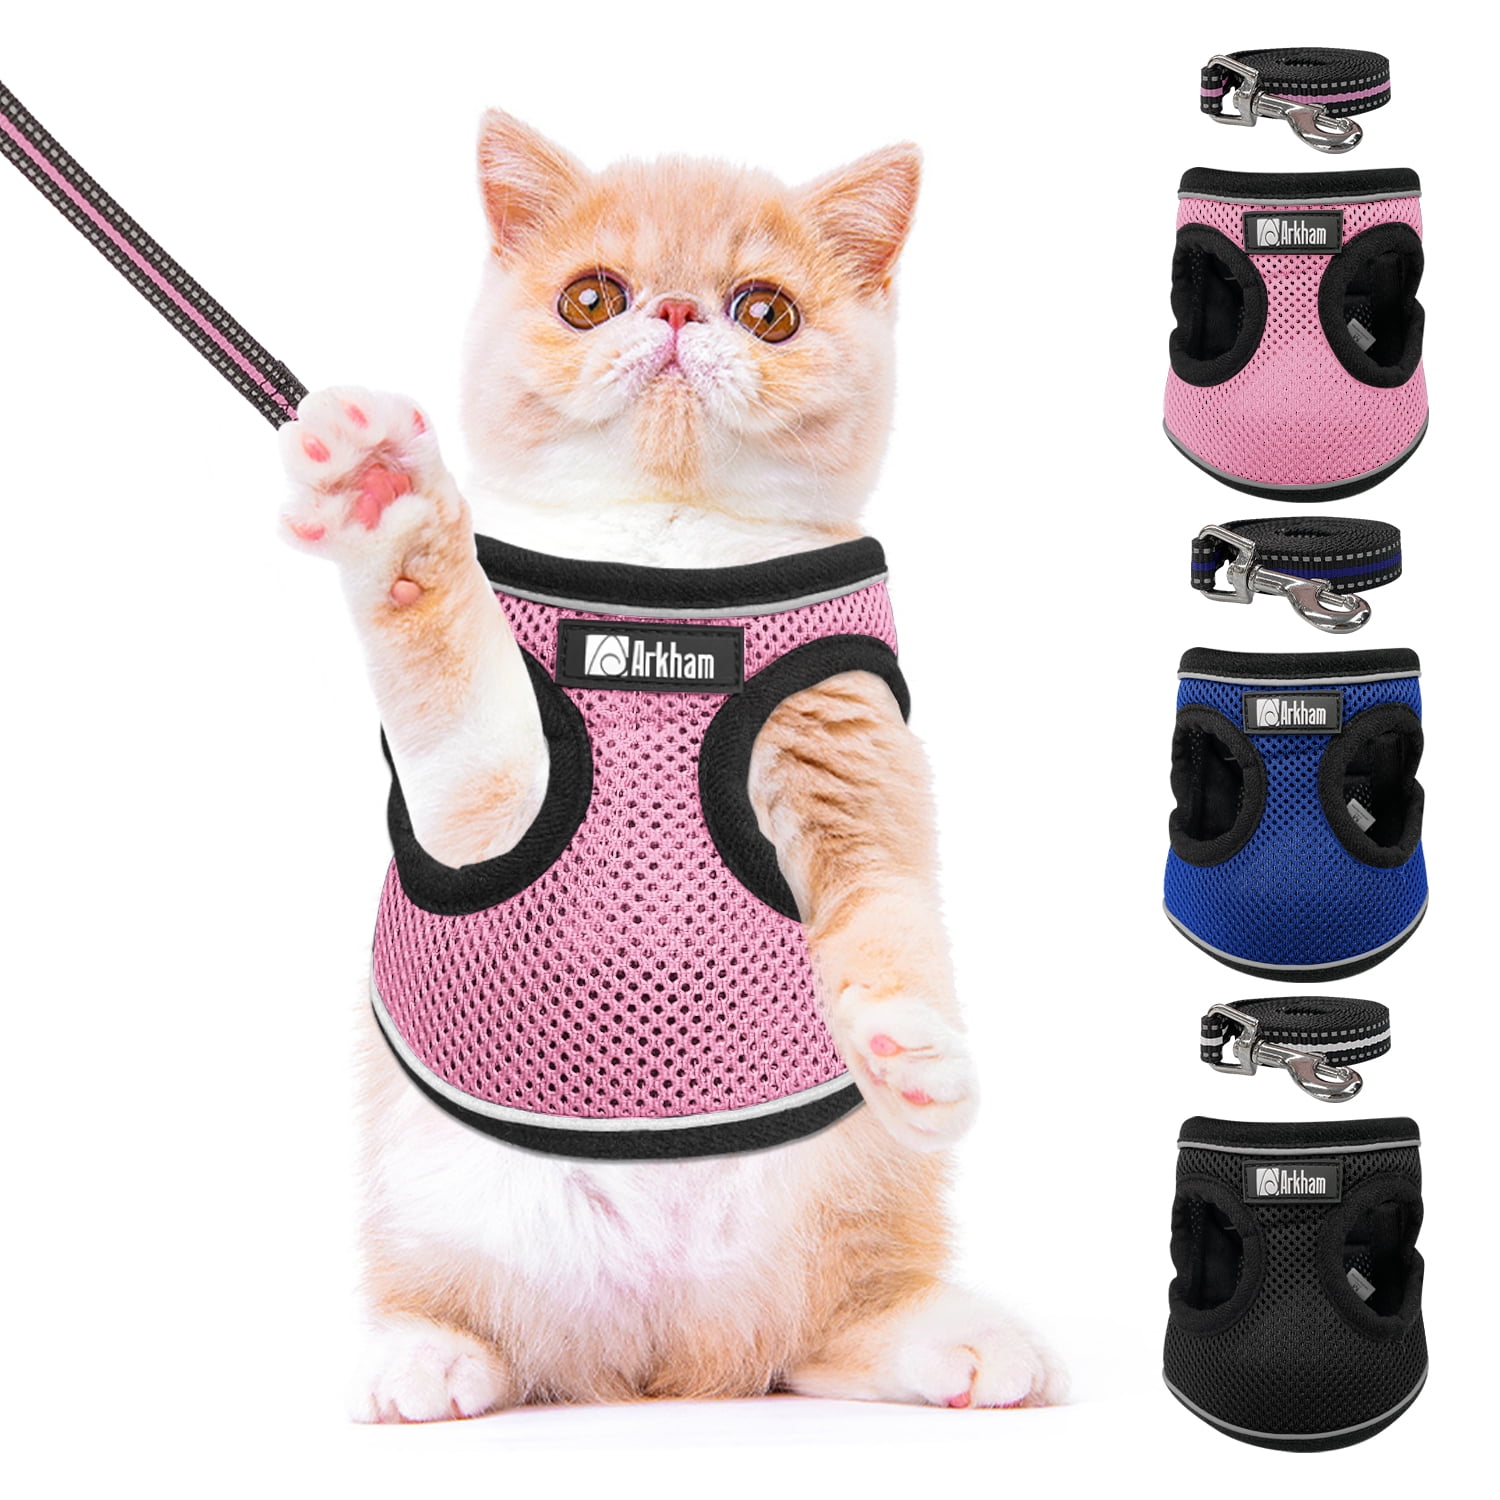 Cat Harness and Leash Set for Walking Escape Proof Small Cat and Dog Harness Soft Mesh Harness Adjustable Cat Vest Harness with Reflective Strap Comfort Fit for Pet Kitten Puppy Rabbit 